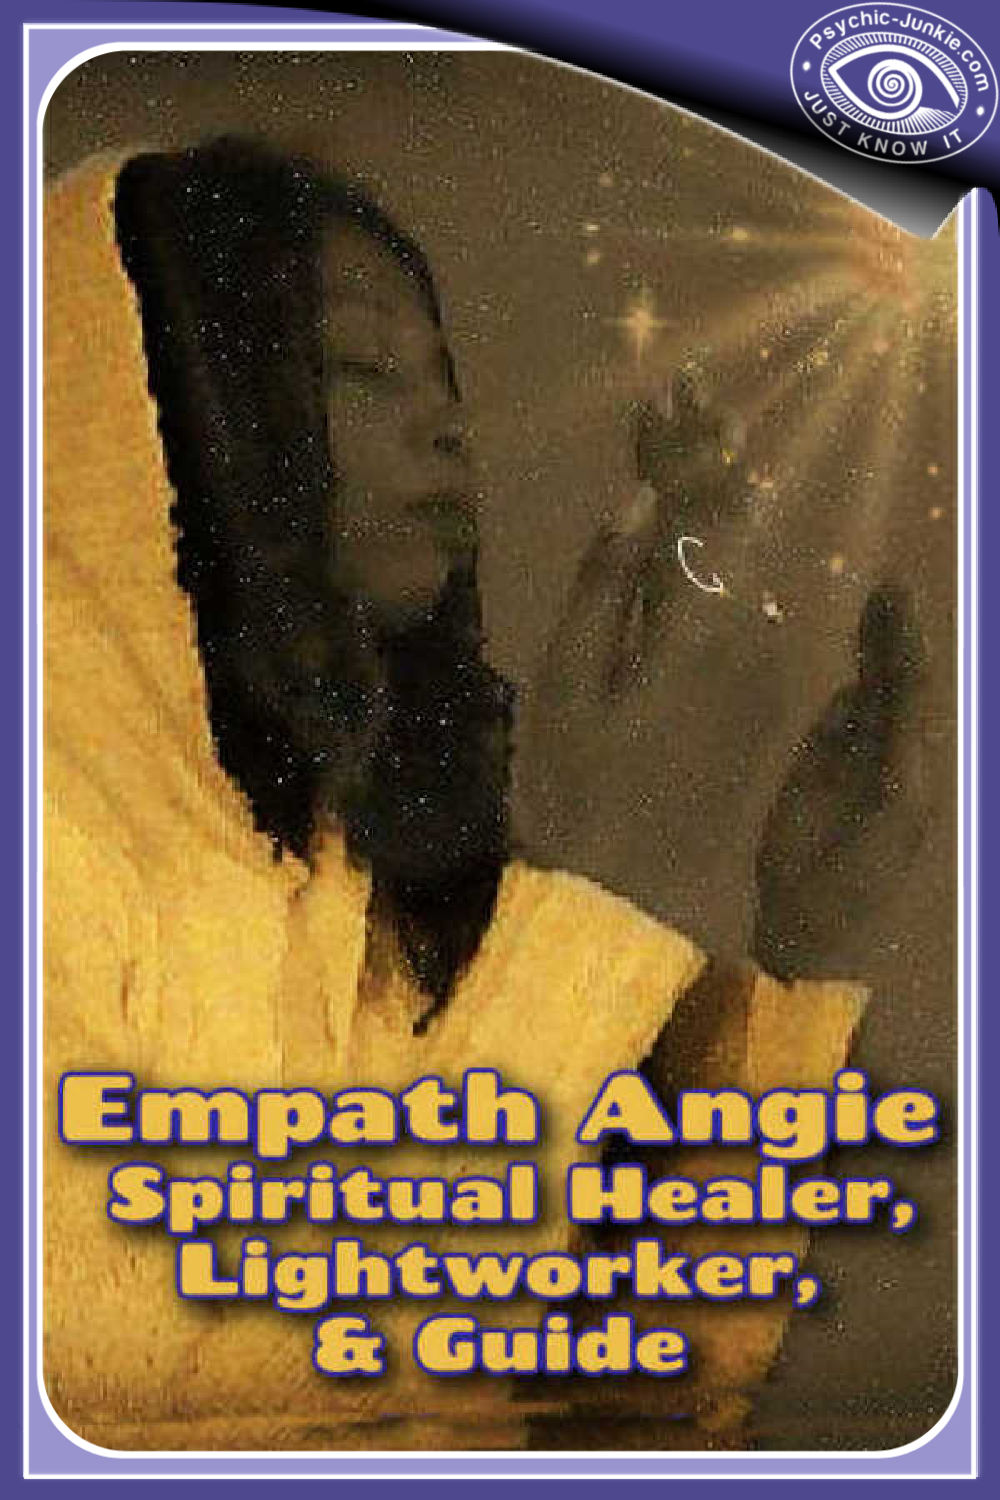 Empath Angie - Psychic Interview